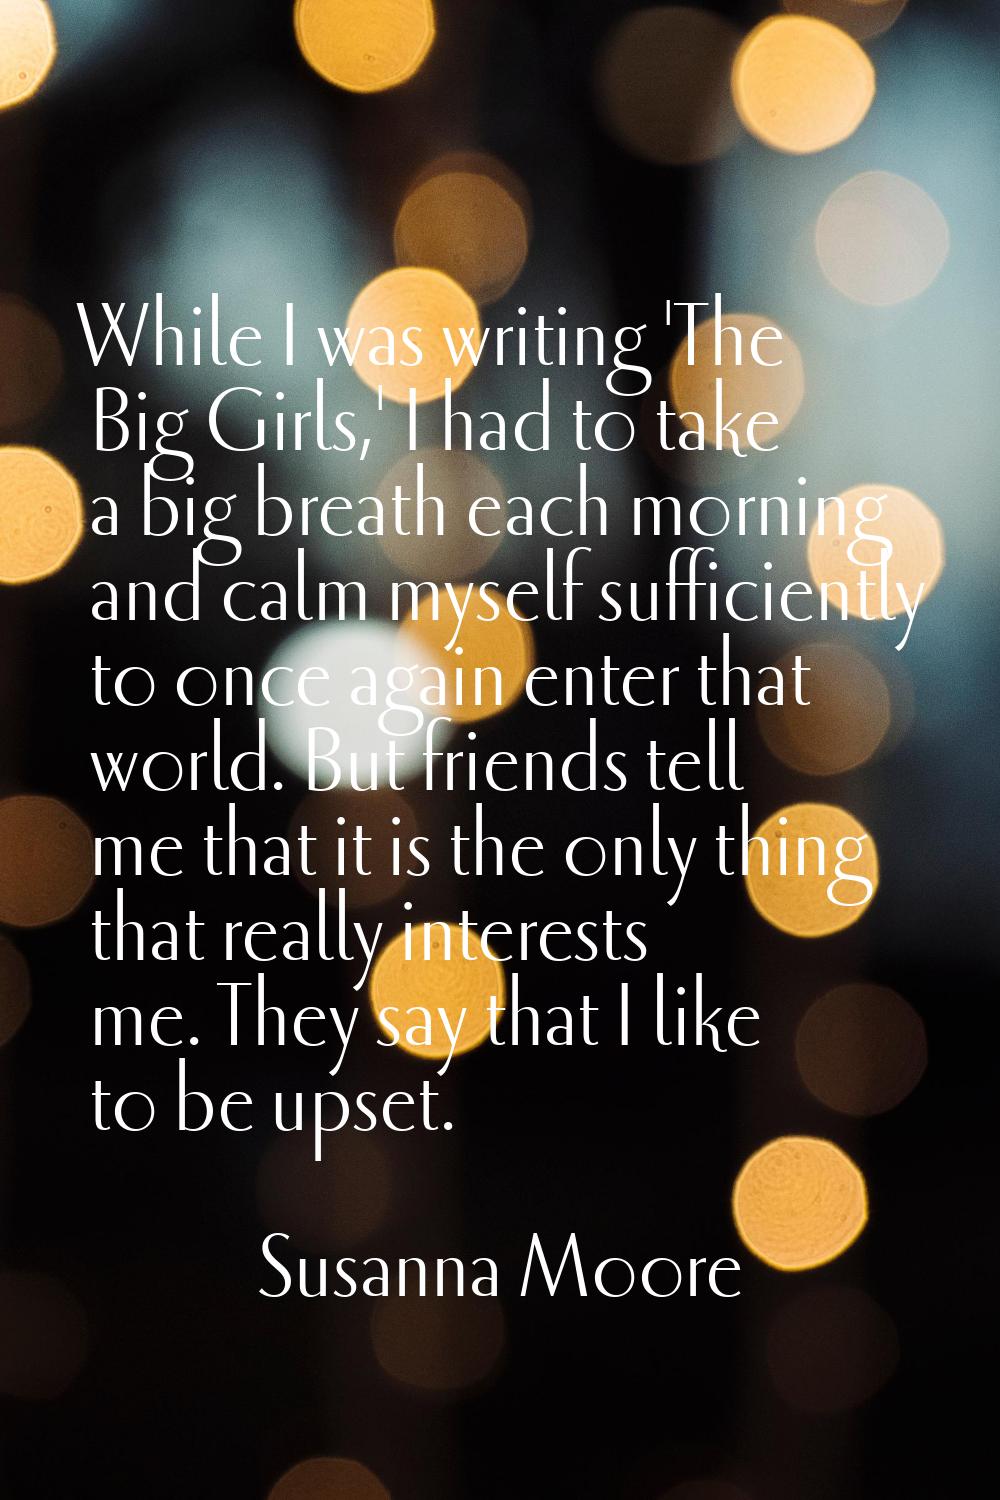 While I was writing 'The Big Girls,' I had to take a big breath each morning and calm myself suffic